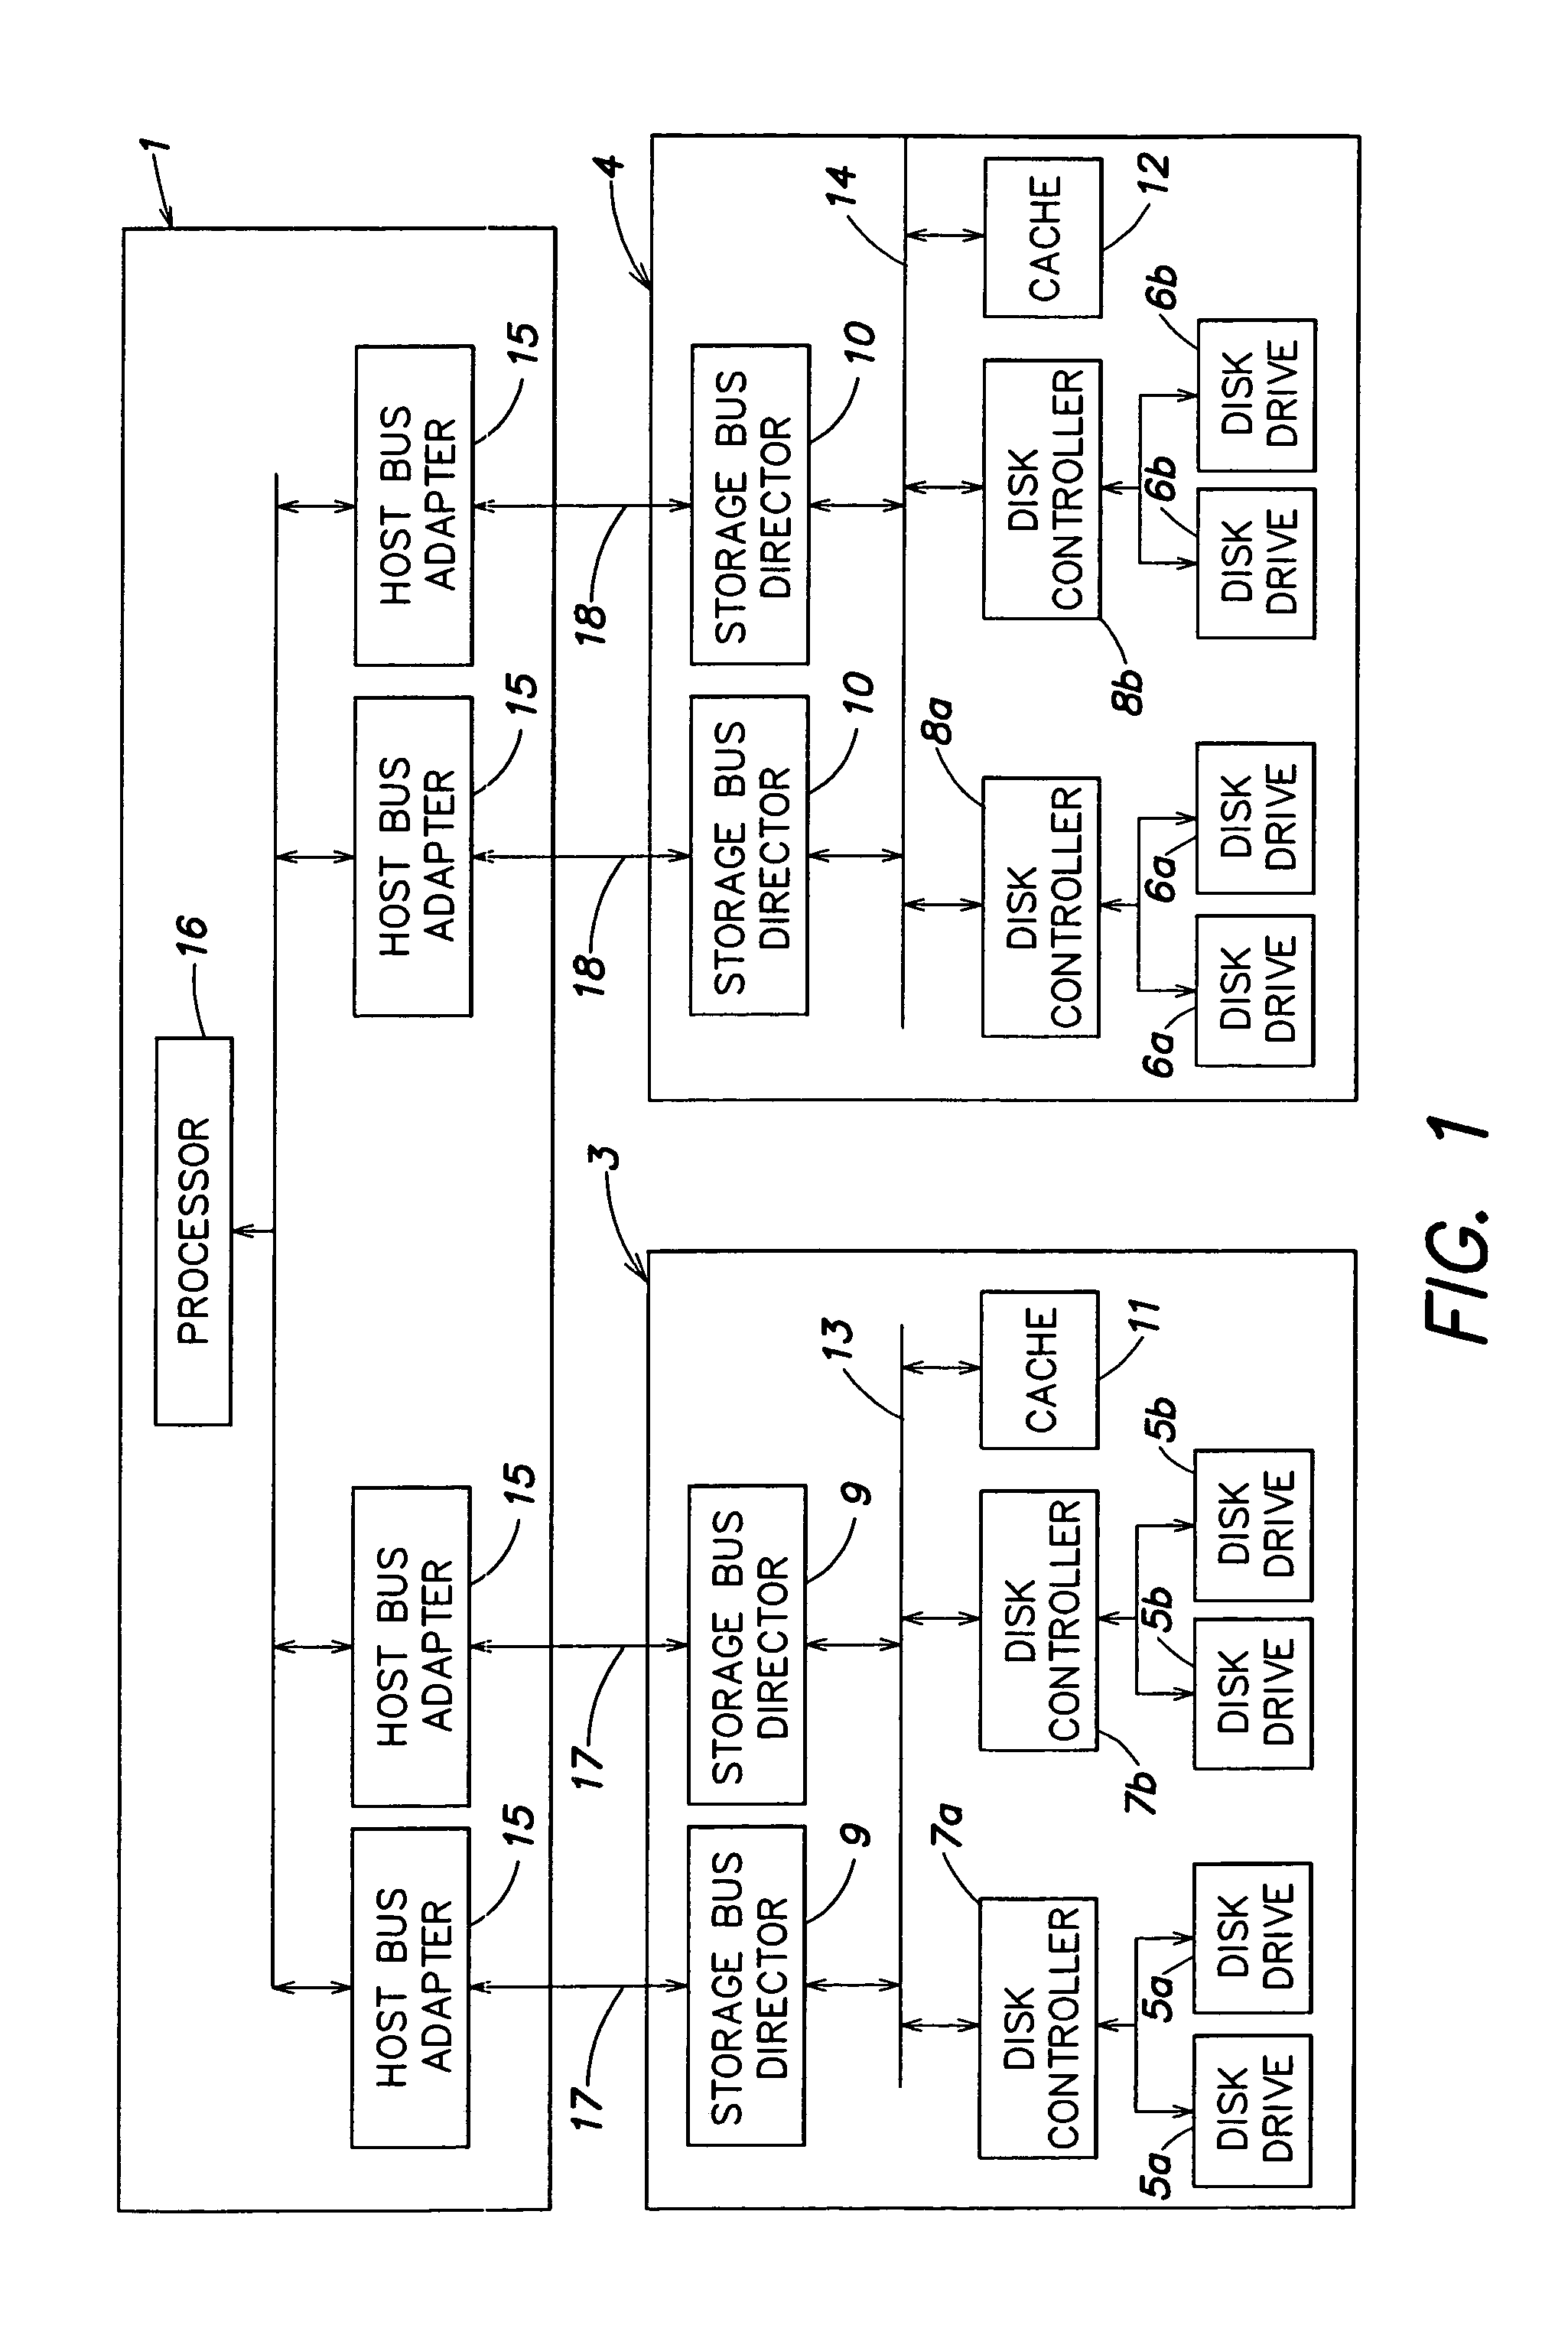 Method and apparatus for migrating data and automatically provisioning a target for the migration